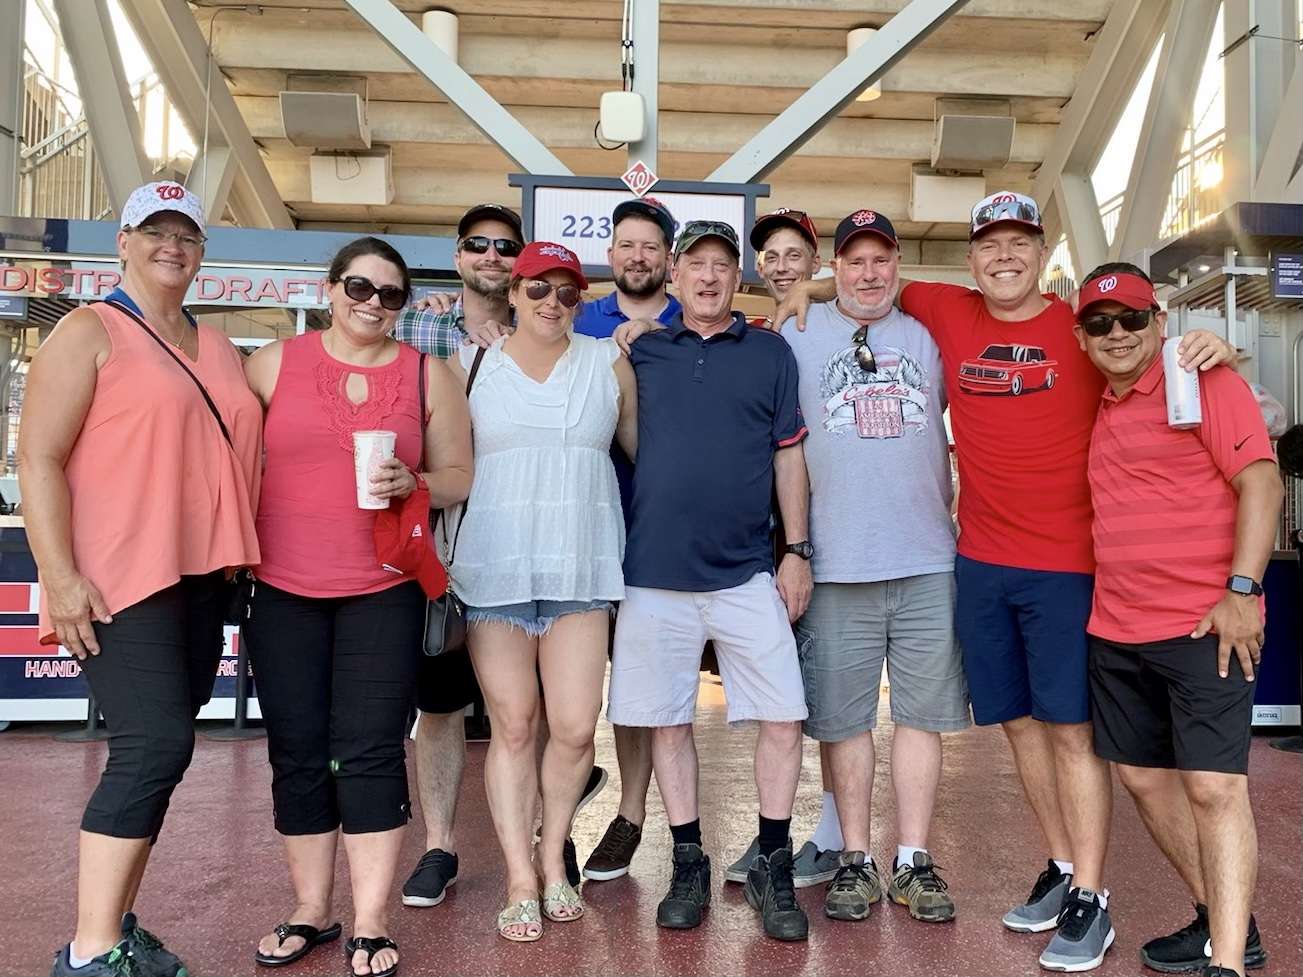 Tim Call at a Nationals game for his retirement party